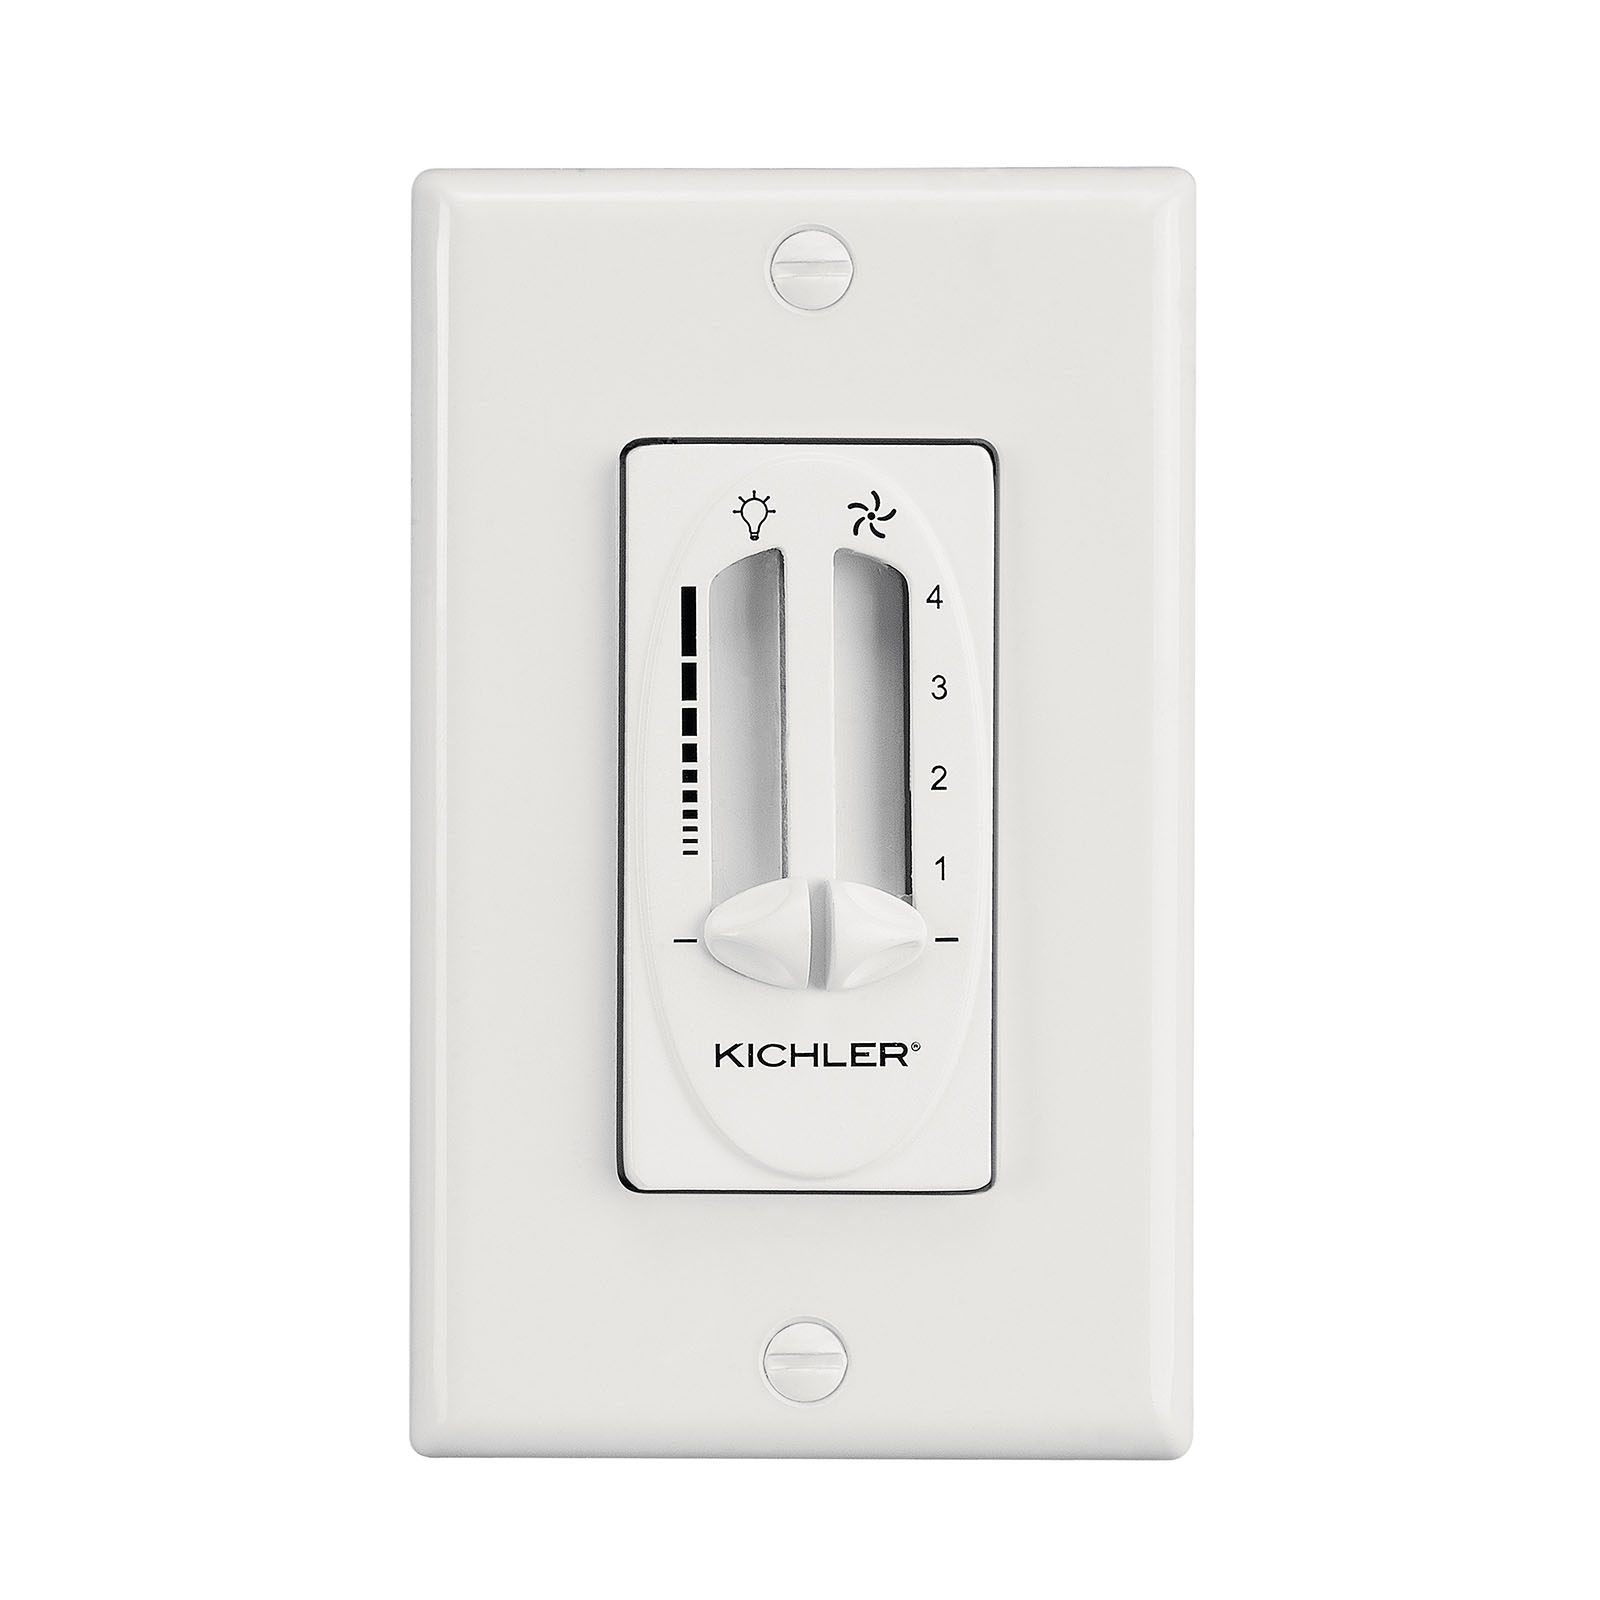 A lighting support necessity, this fan 4 speed light dimmer features a classic White finish.